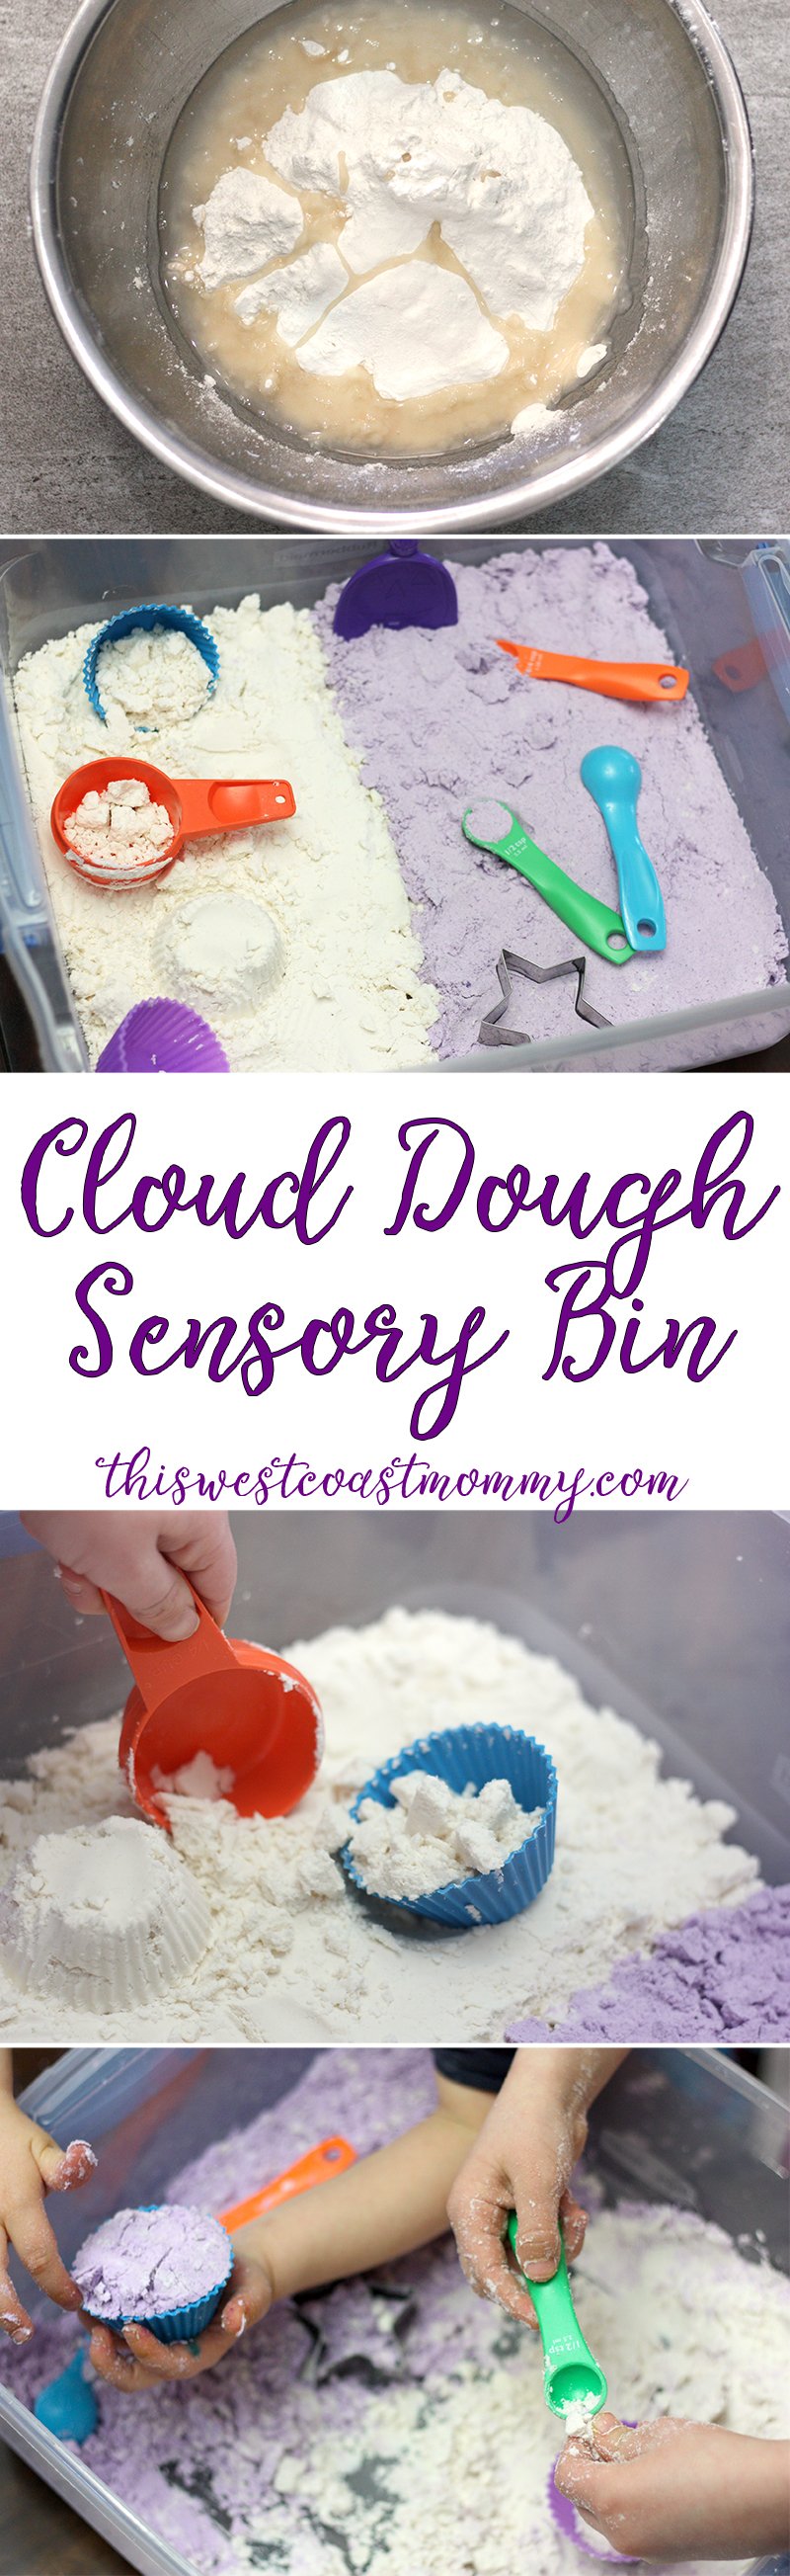 Cloud dough, also called moon sand, has the unique property of being moldable and crumbly at the same time. It's a sensory treat for kids of all ages - fun to scoop, mold, build with, or just squish between your fingers!